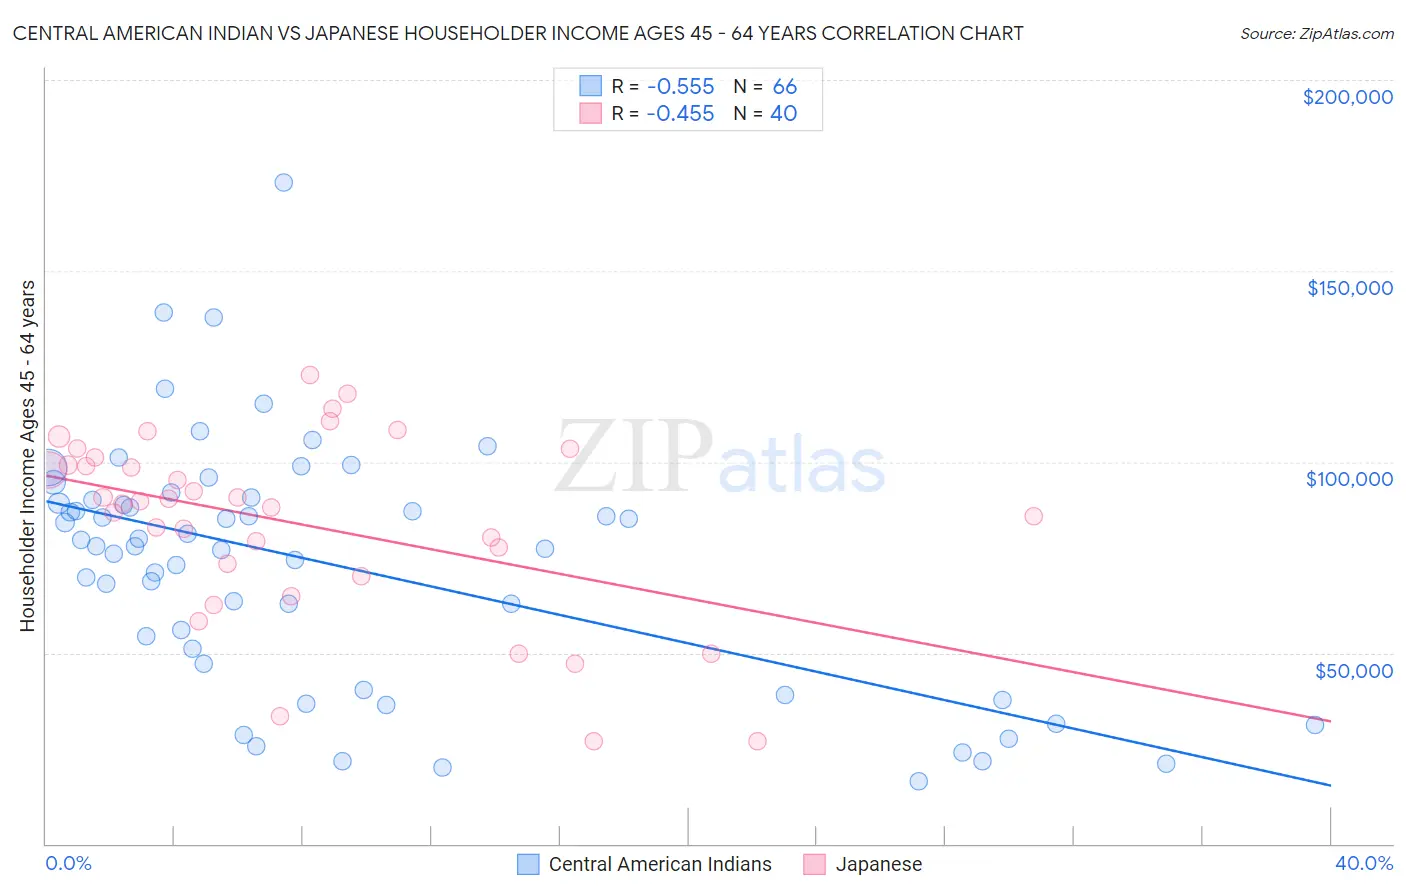 Central American Indian vs Japanese Householder Income Ages 45 - 64 years